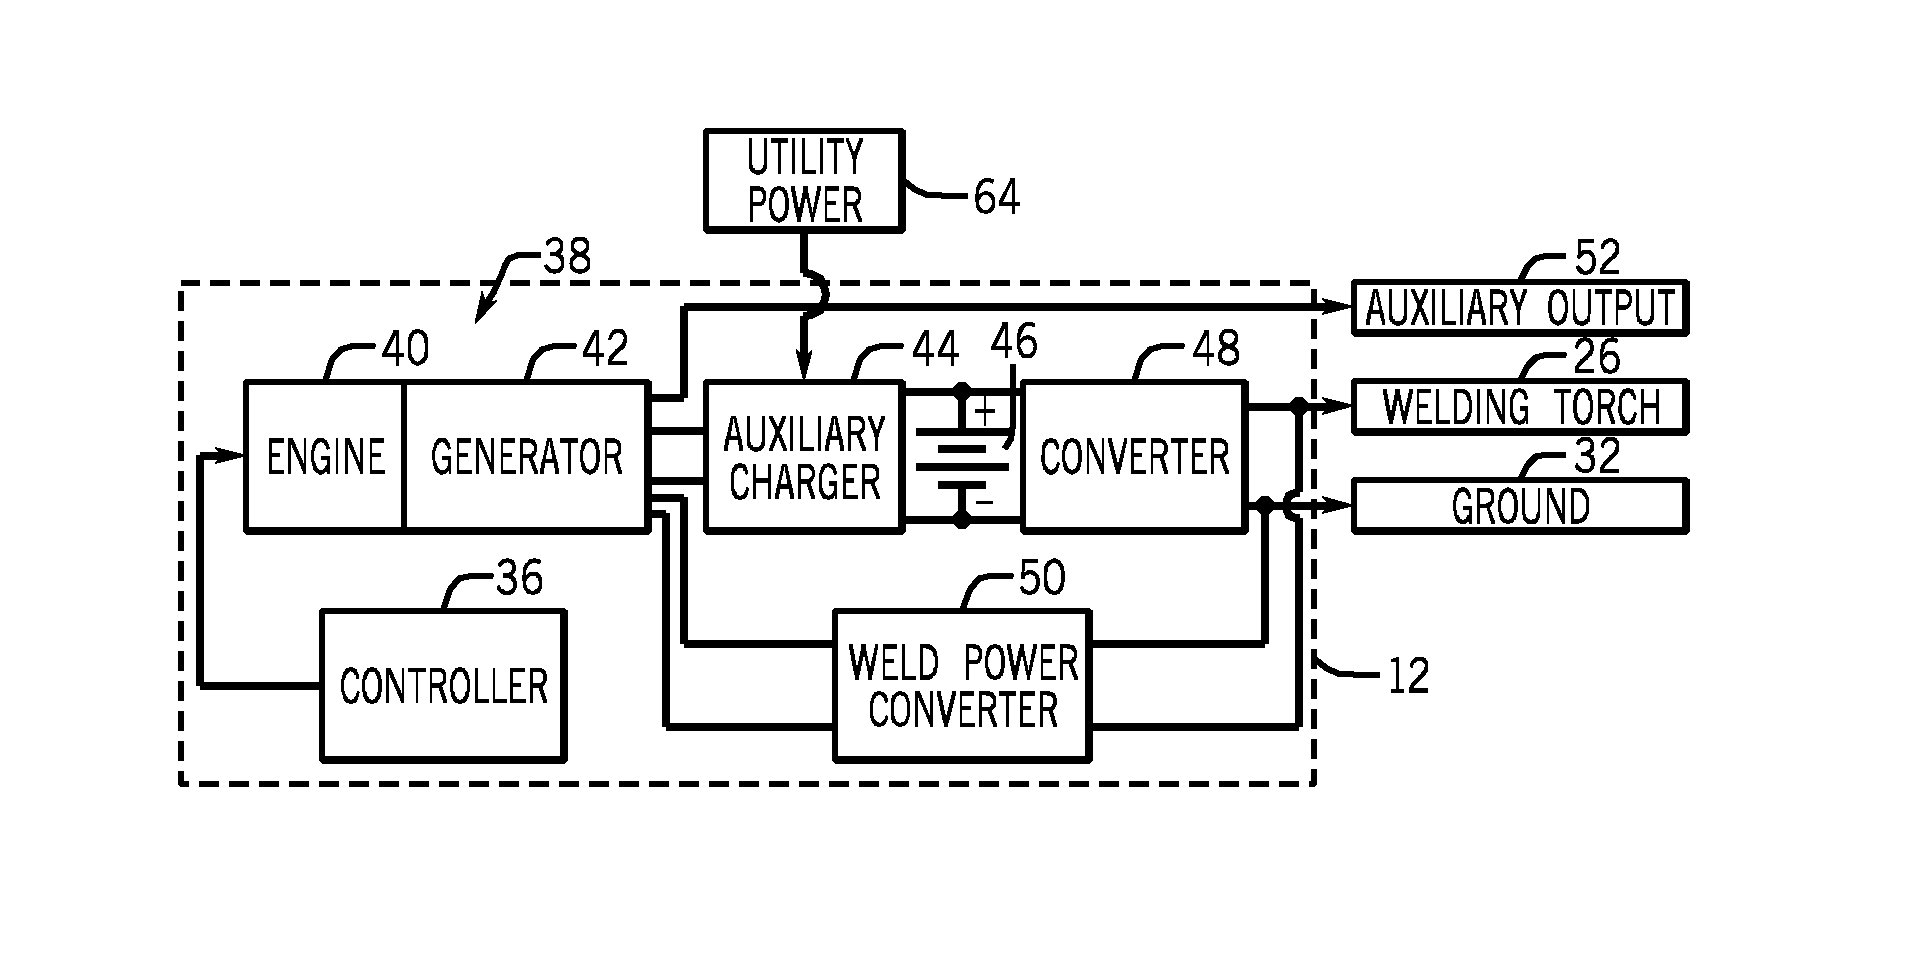 Welding system having an auxiliary charger